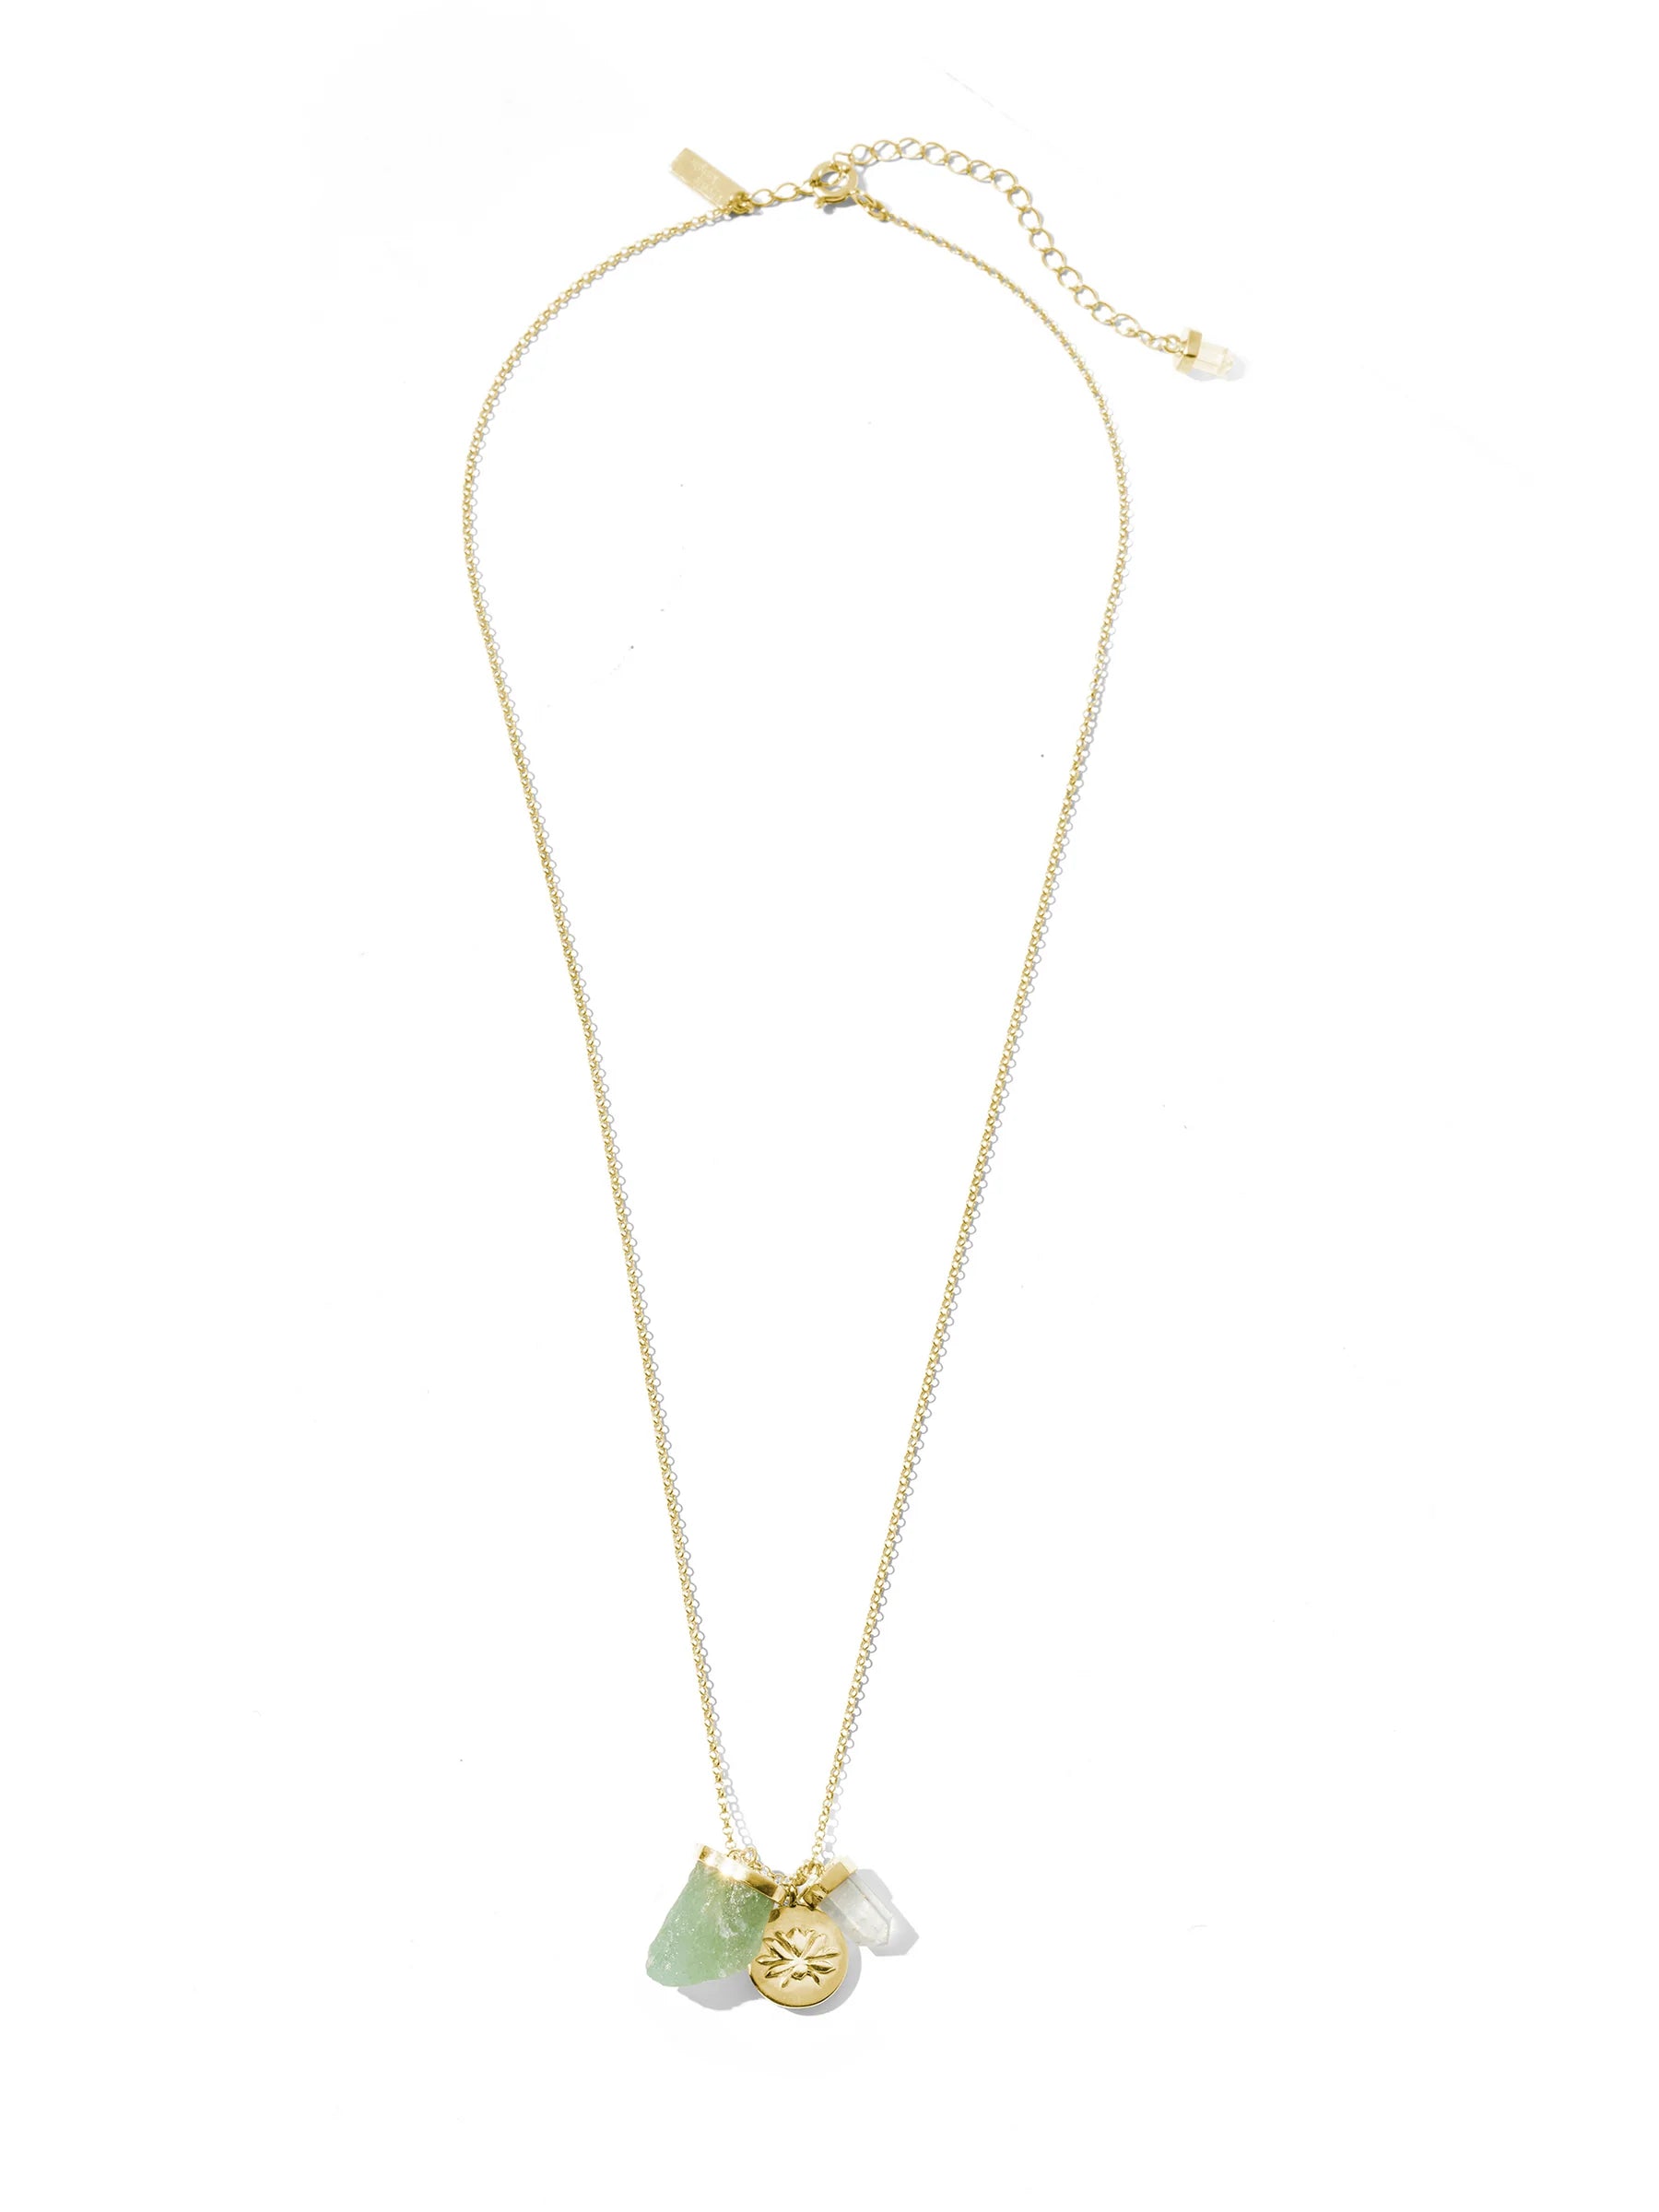 Krystle Knight Jewellery The Lucky Necklace - Green Aventurine, Clear Quartz + Lotus (Gold) ✨